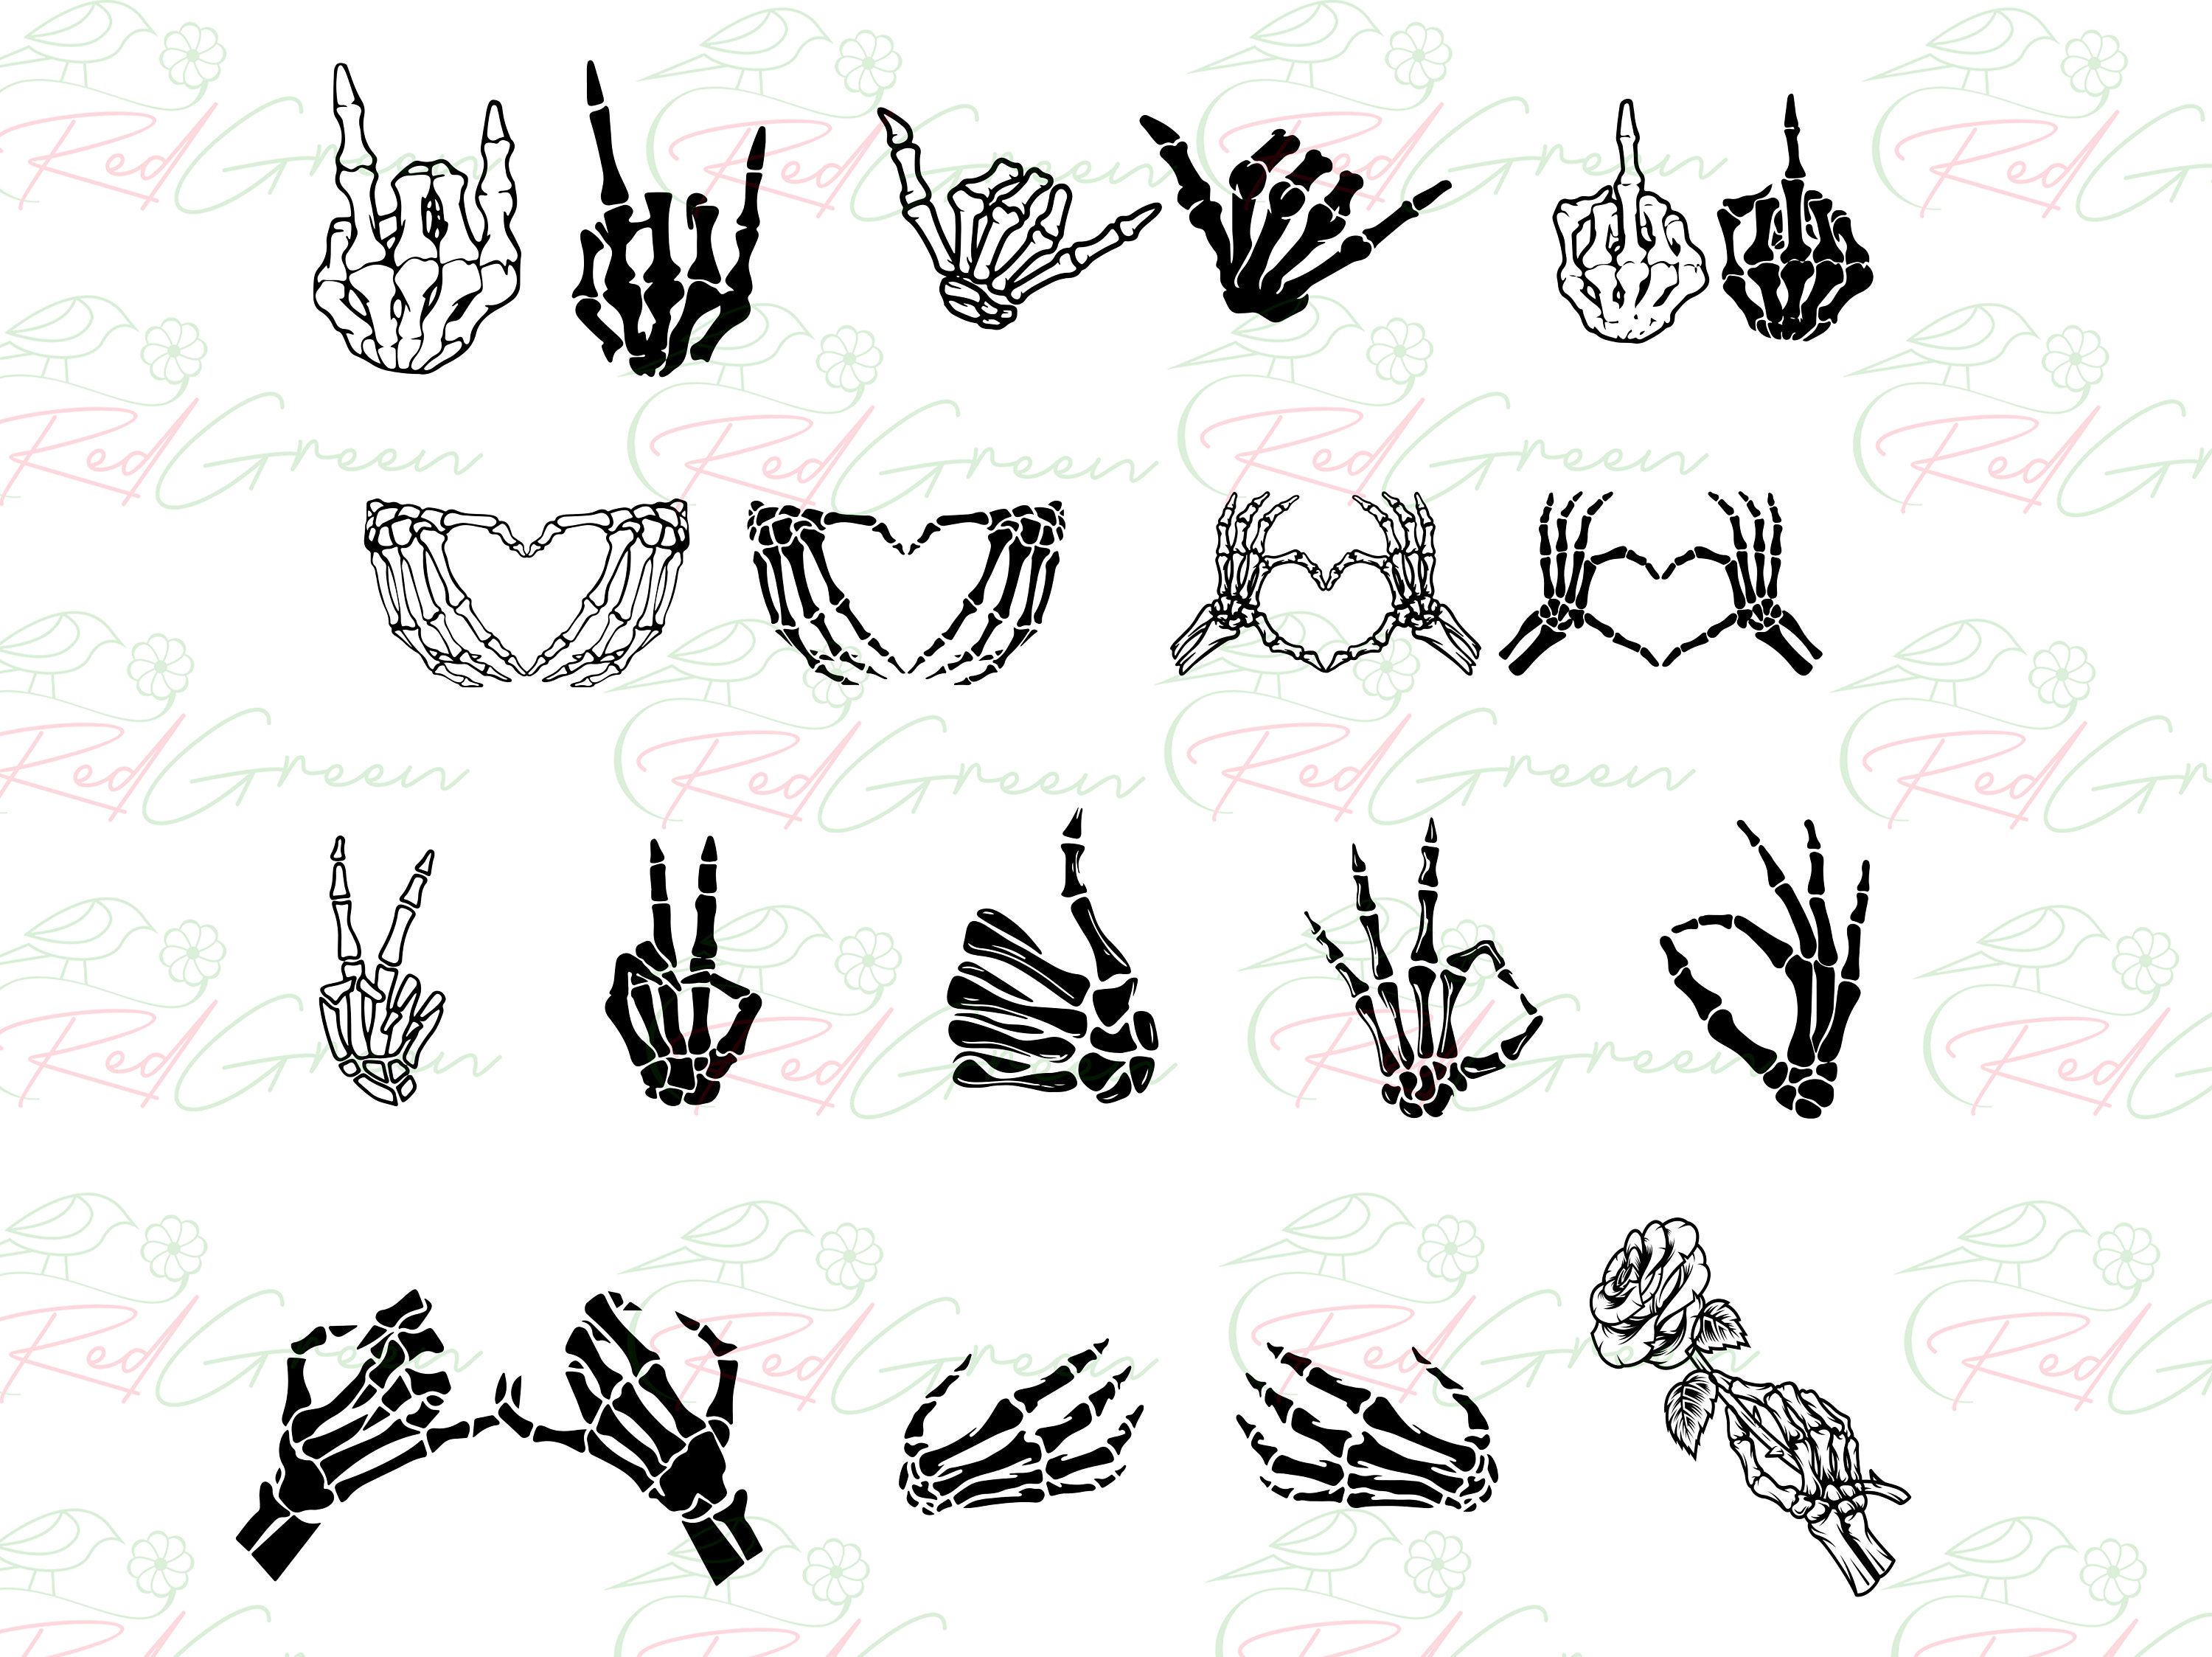 Skeleton Hands SVG, PNG, EPS Graphic by LunaDesign · Creative Fabrica